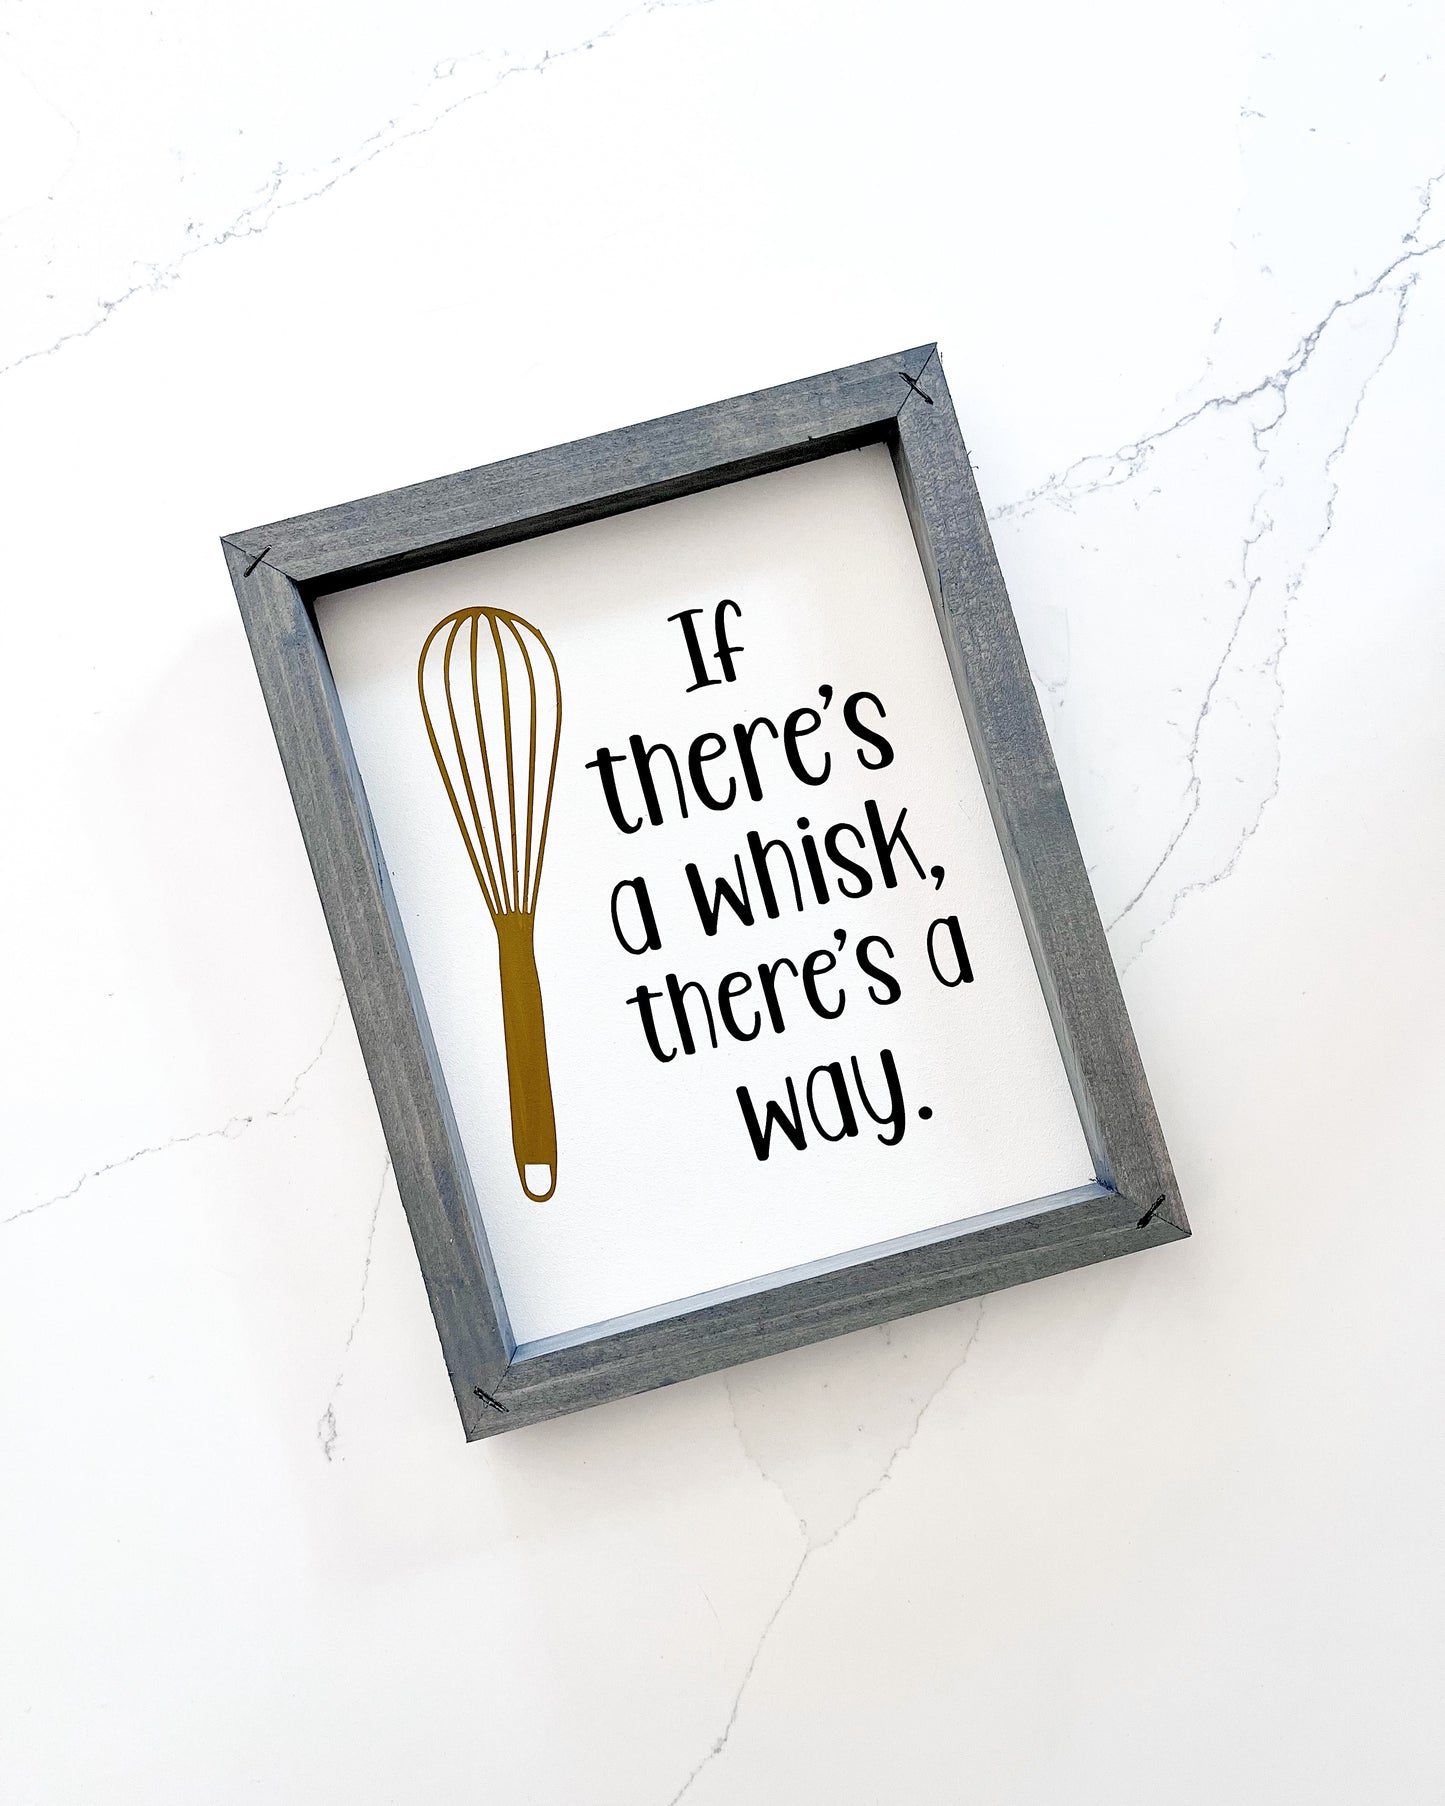 If there's a whisk, there's a way.